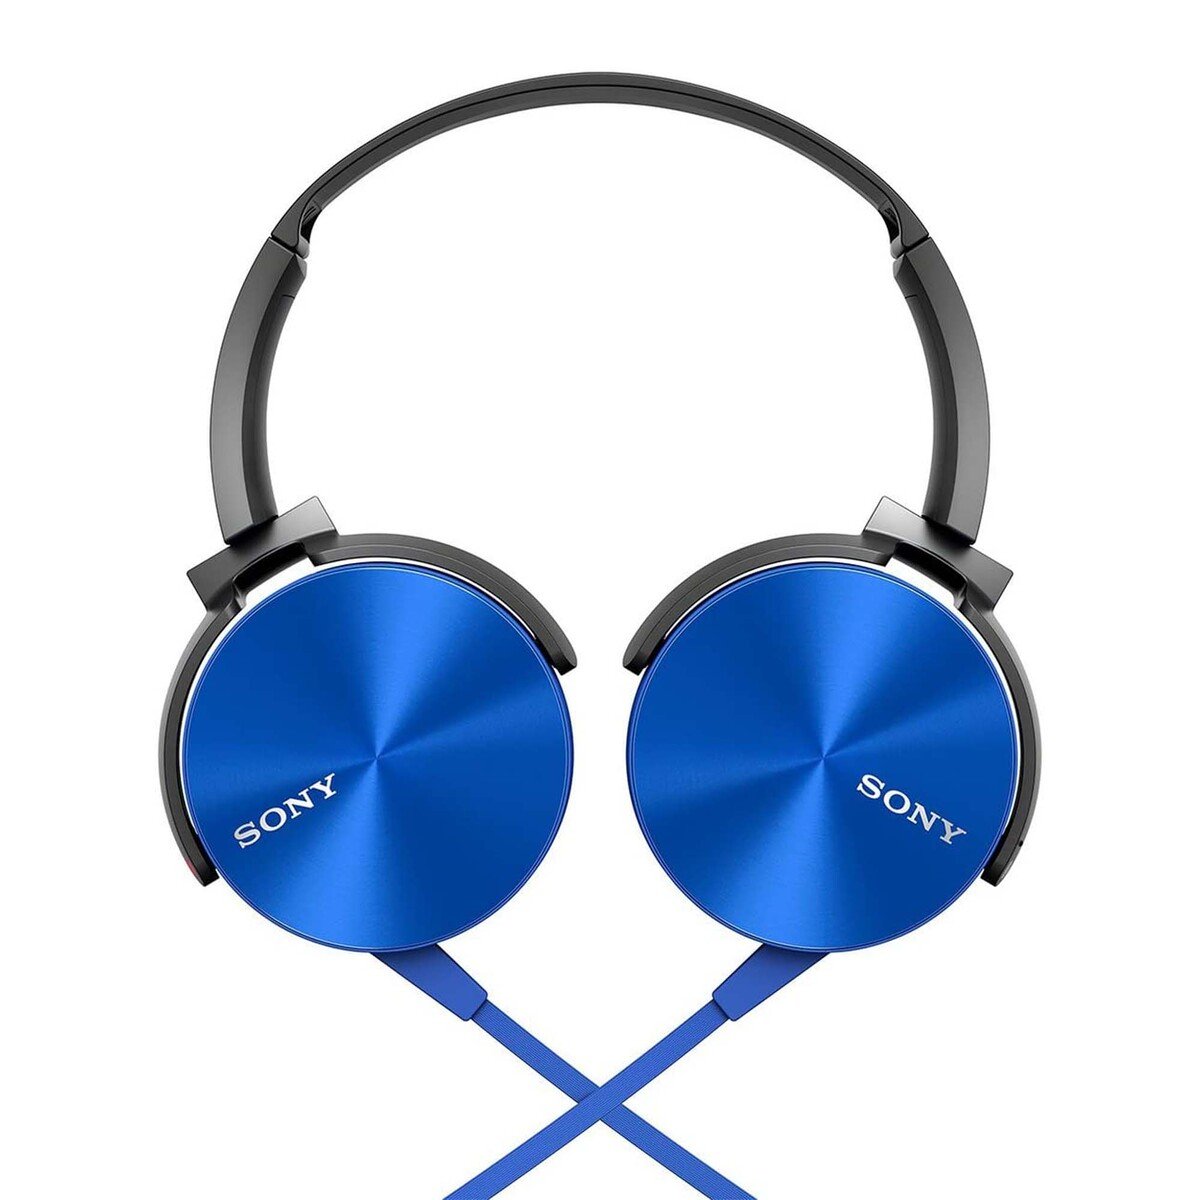 Sony Extra Bass Wired on-ear Headphone MDR-XB450AP Blue